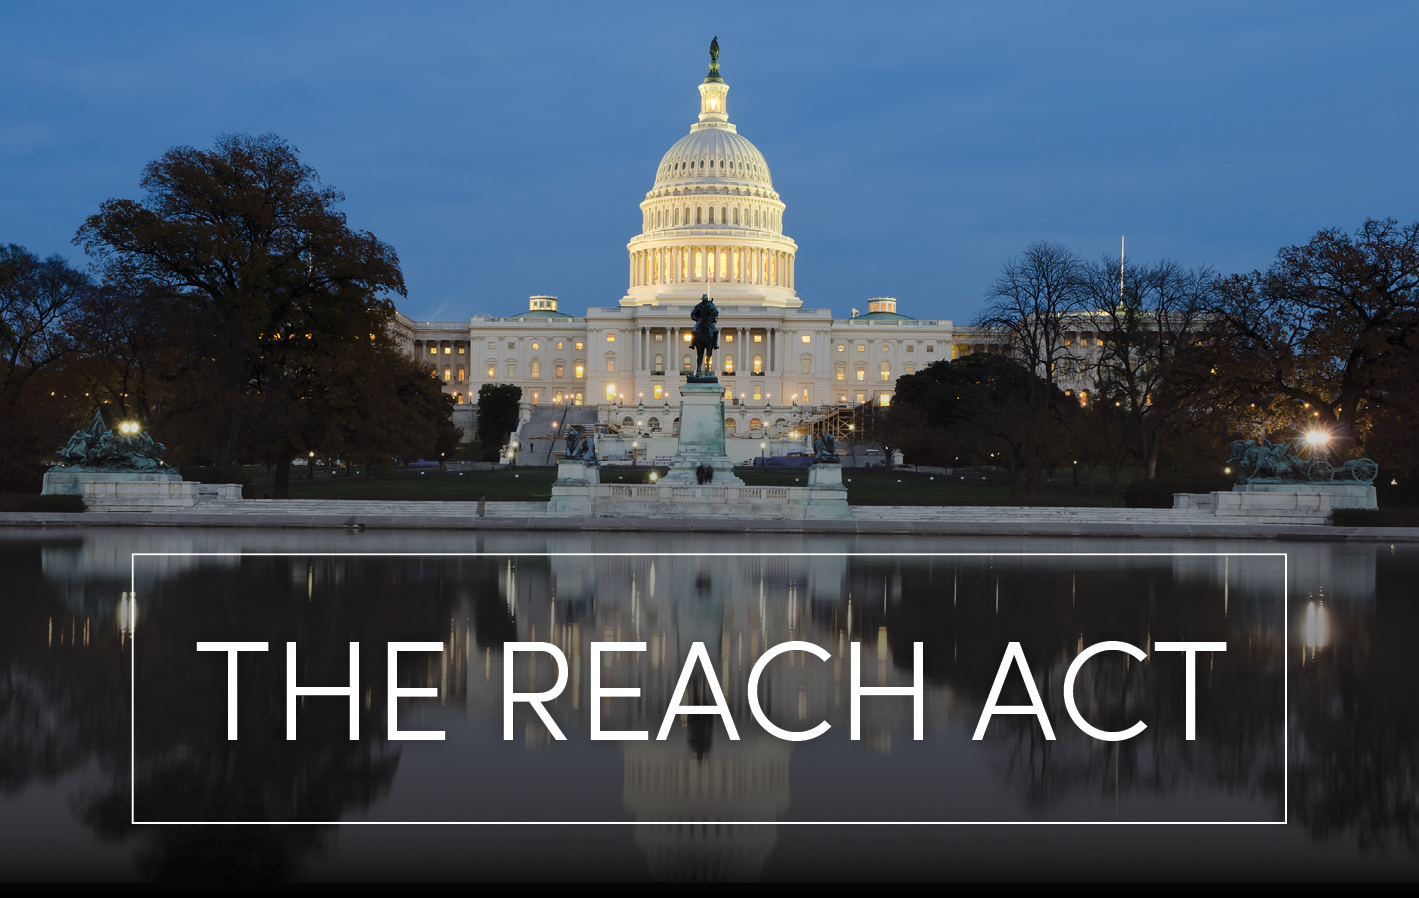 The Capitol Building at night with text overlaid, "The REACH Act"